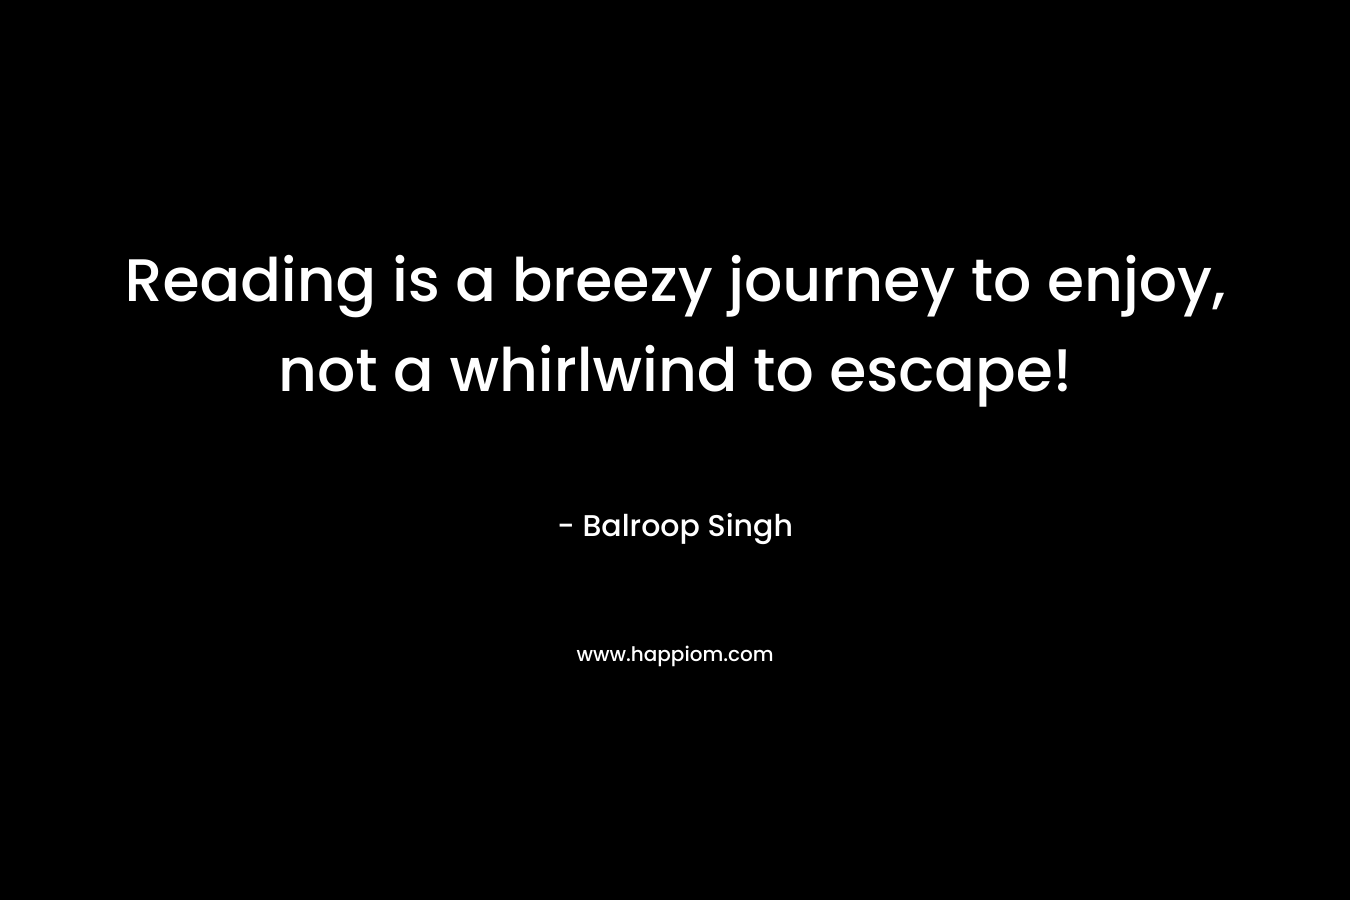 Reading is a breezy journey to enjoy, not a whirlwind to escape! – Balroop Singh